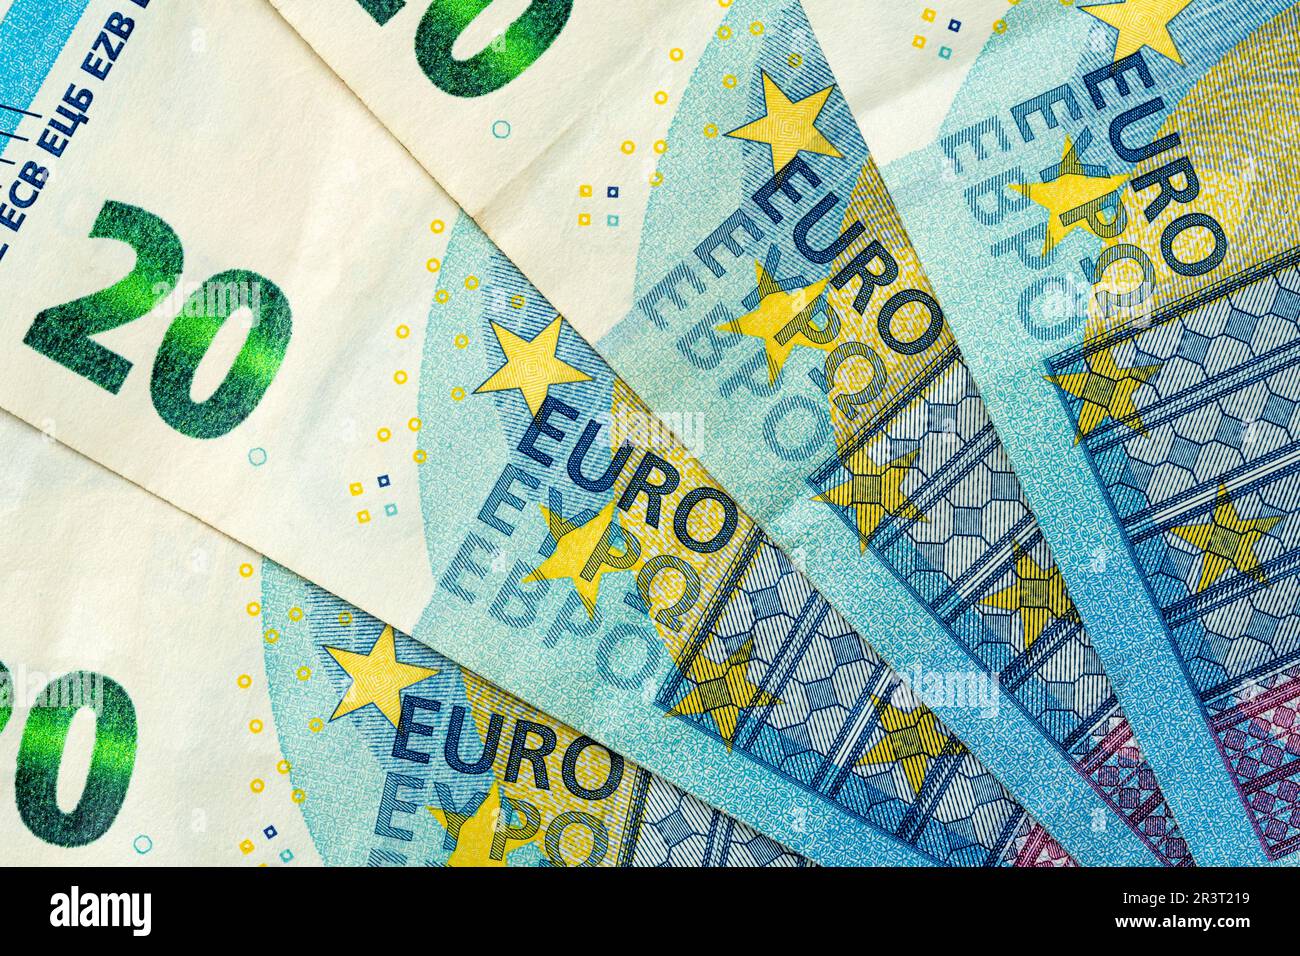 Blue banknotes of 20 euros beautifully laid out Stock Photo